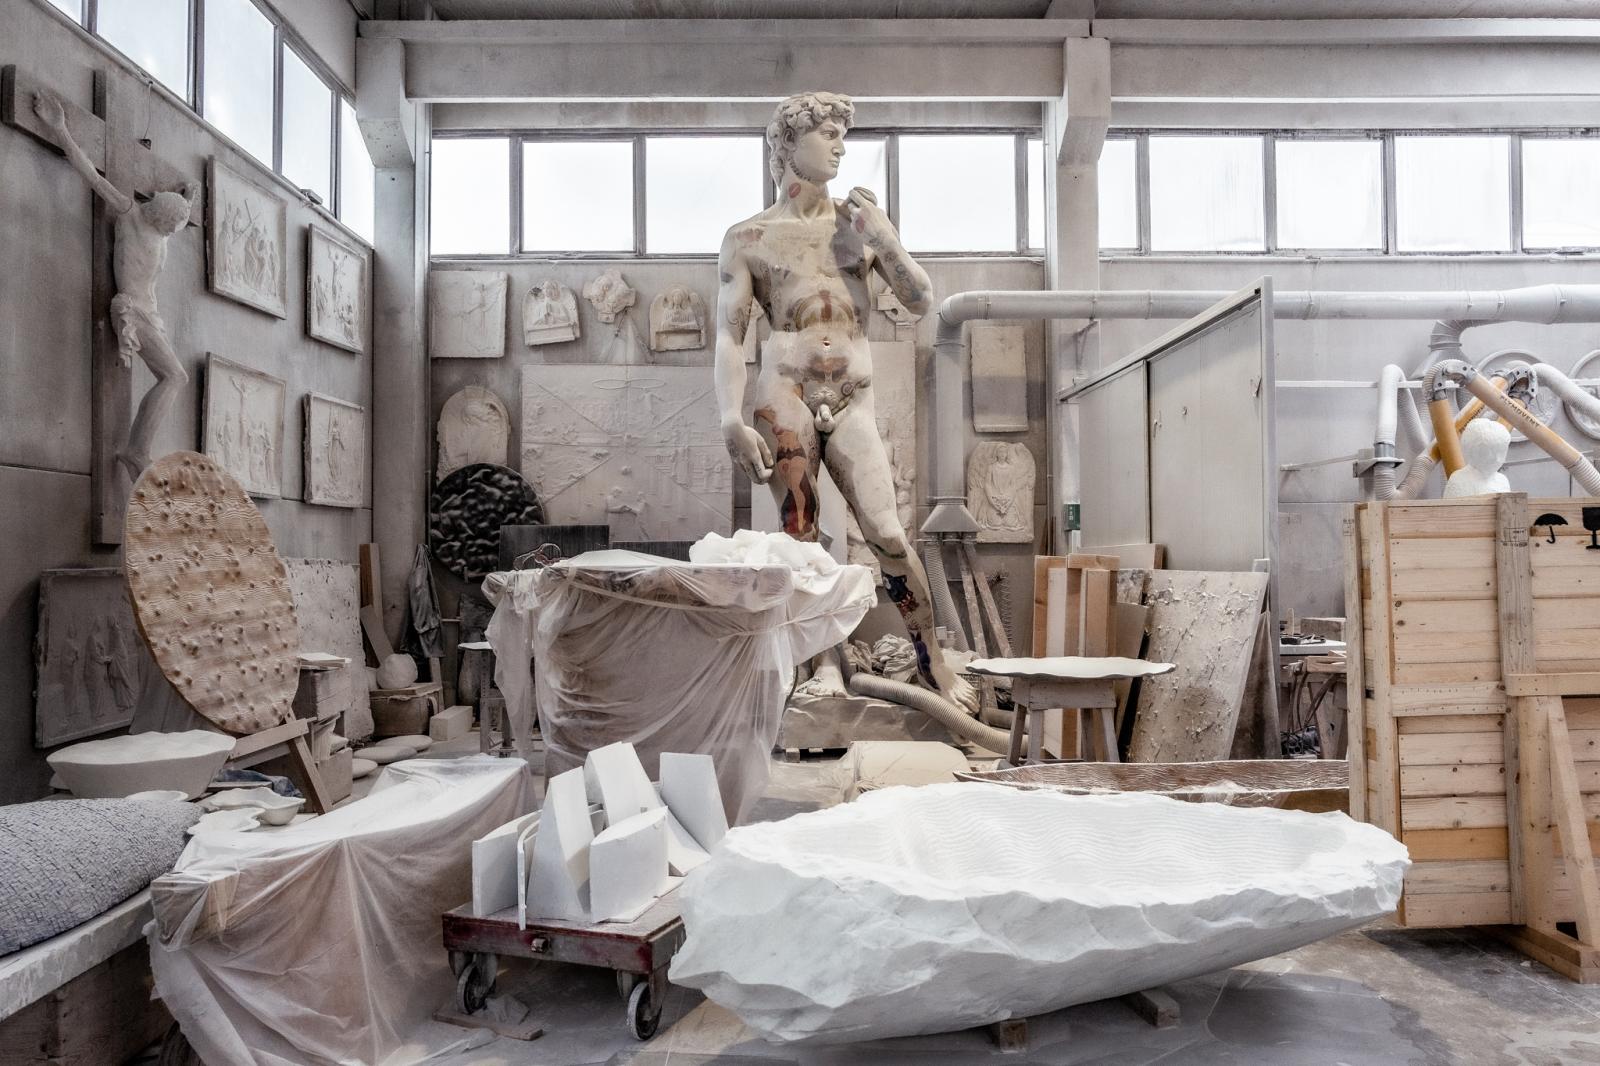 Carrara Marble, the fate of a land in dust. Featured in Radar Magazine (Italy).